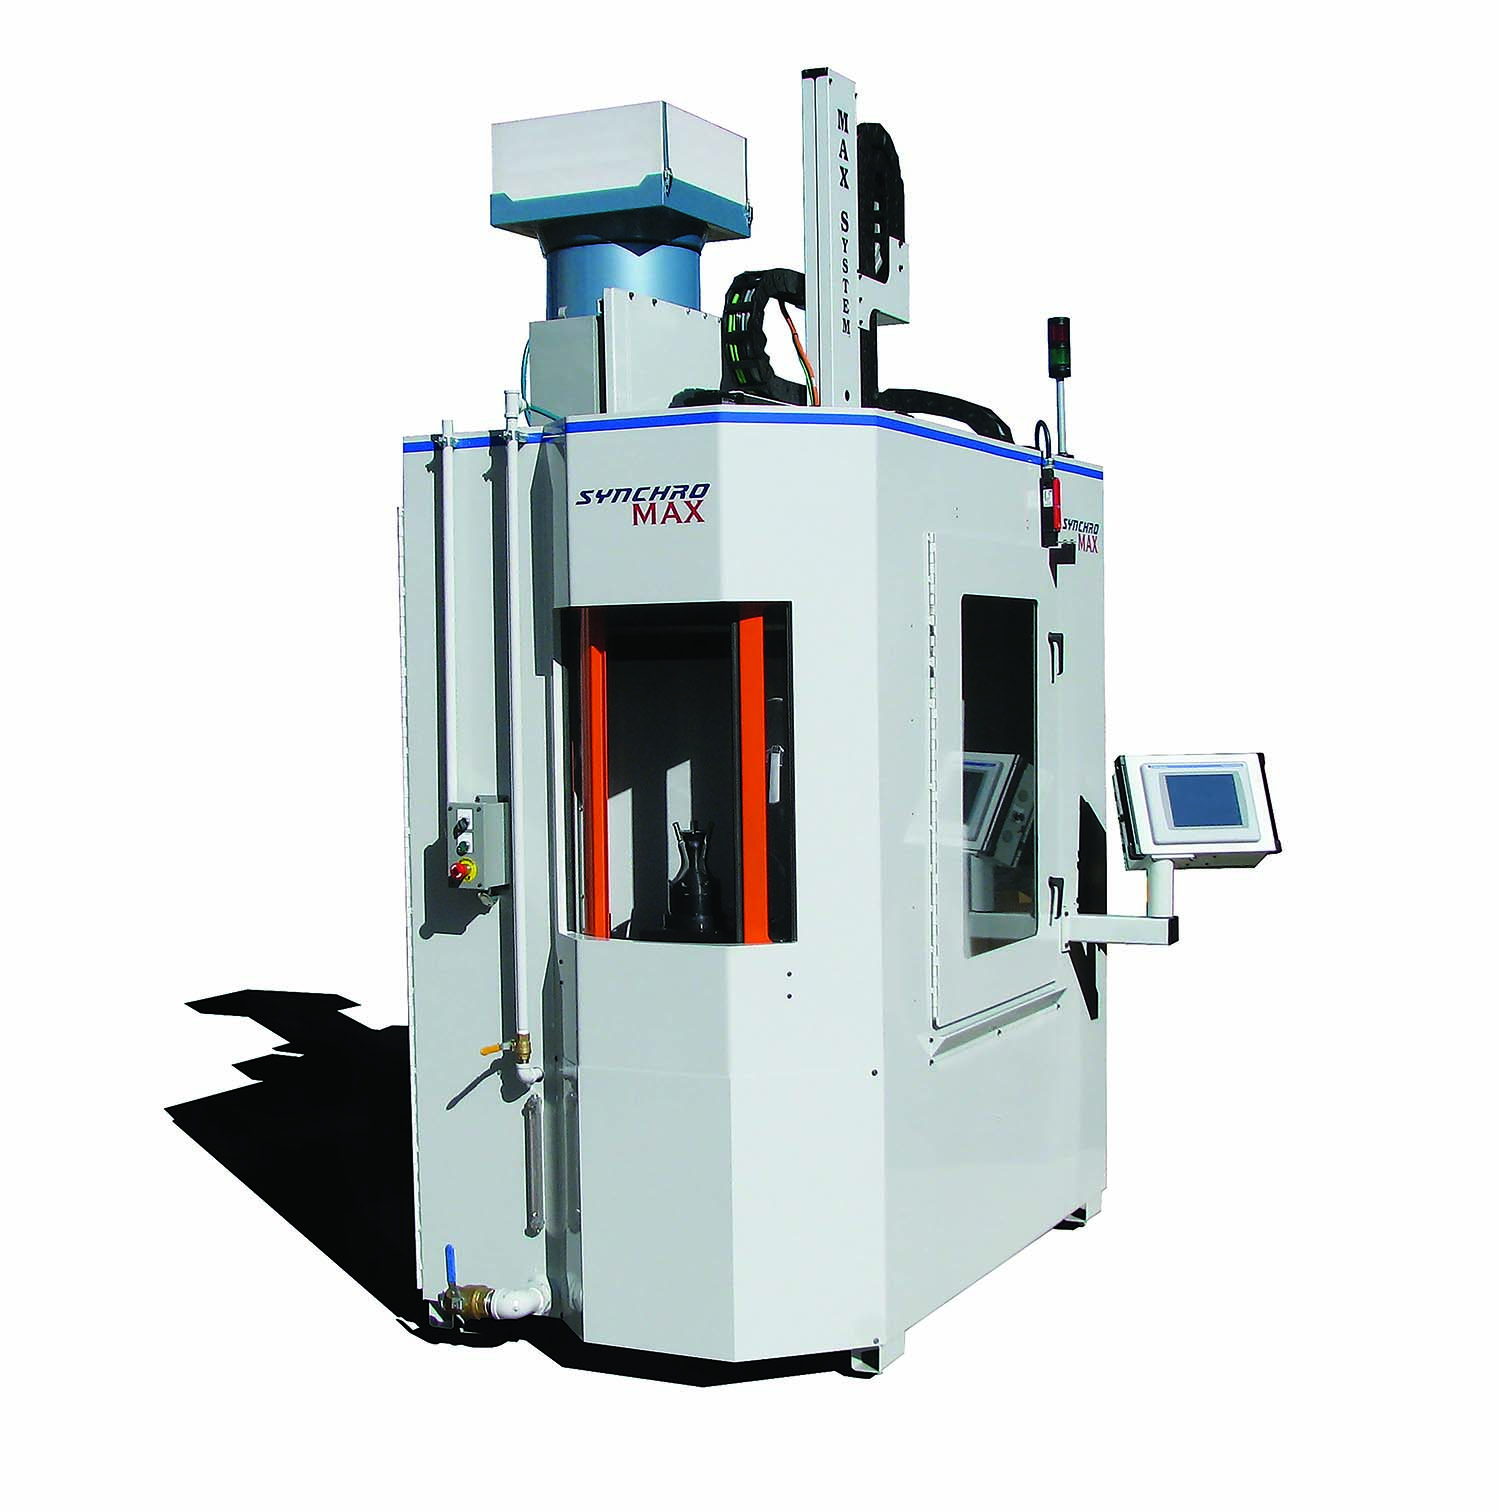 The SynchroMax SM4 is ideal for higher-production facilities that need to maximize operators.